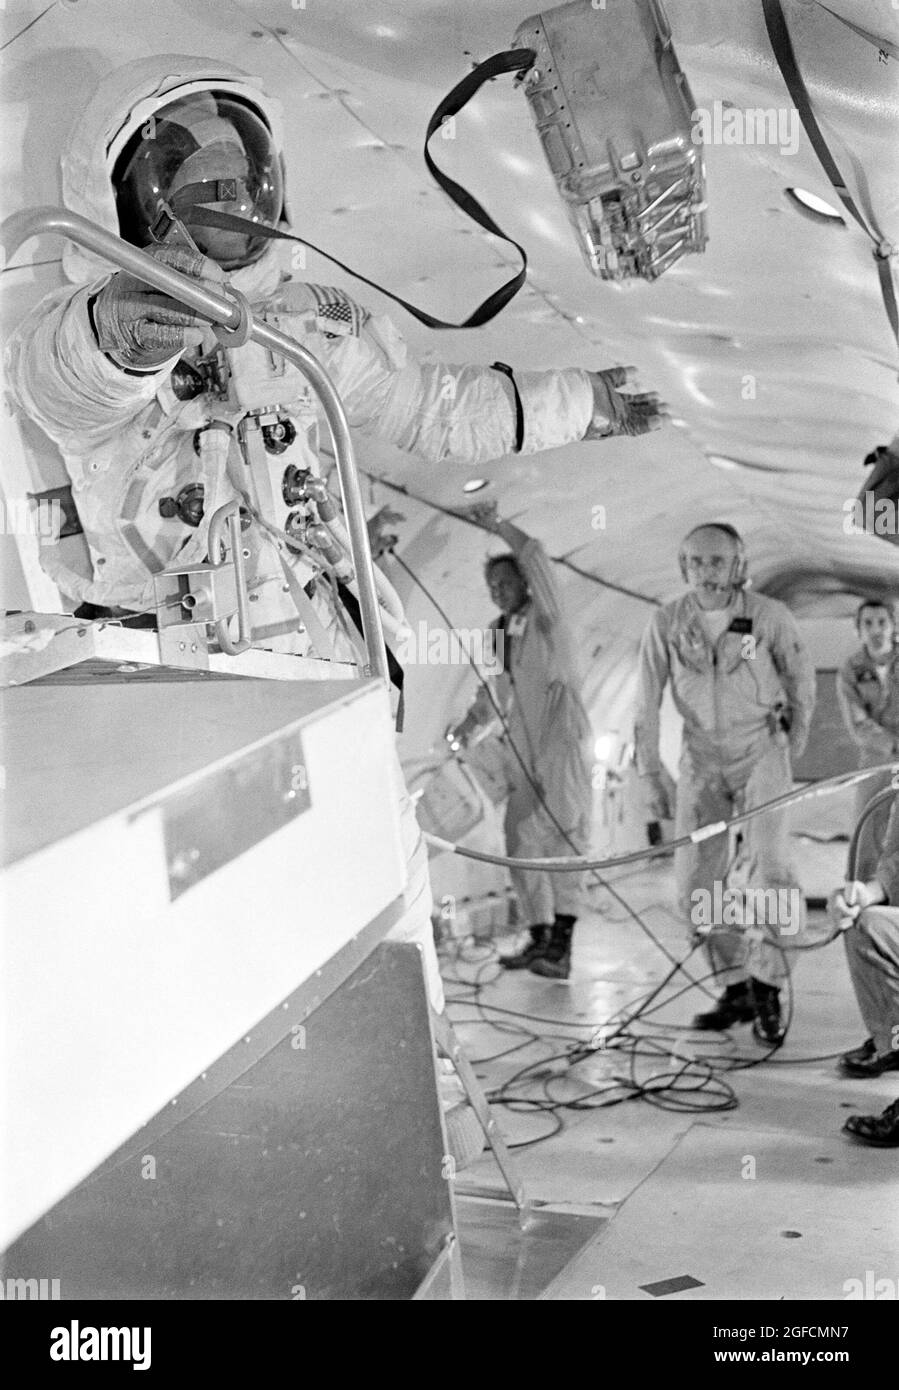 (10 July 1969)  --- Astronaut Edwin E. Aldrin Jr., lunar module pilot of the Apollo 11 lunar landing mission, participates in lunar extravehicular activity training under weightlessness conditions aboard a U.S. Air Force KC-135 jet aircraft from nearby Patrick Air Force Base.  Aldrin is wearing an Extravehicular Mobility Unit, the type of equipment which he will wear on the lunar surface. Stock Photo